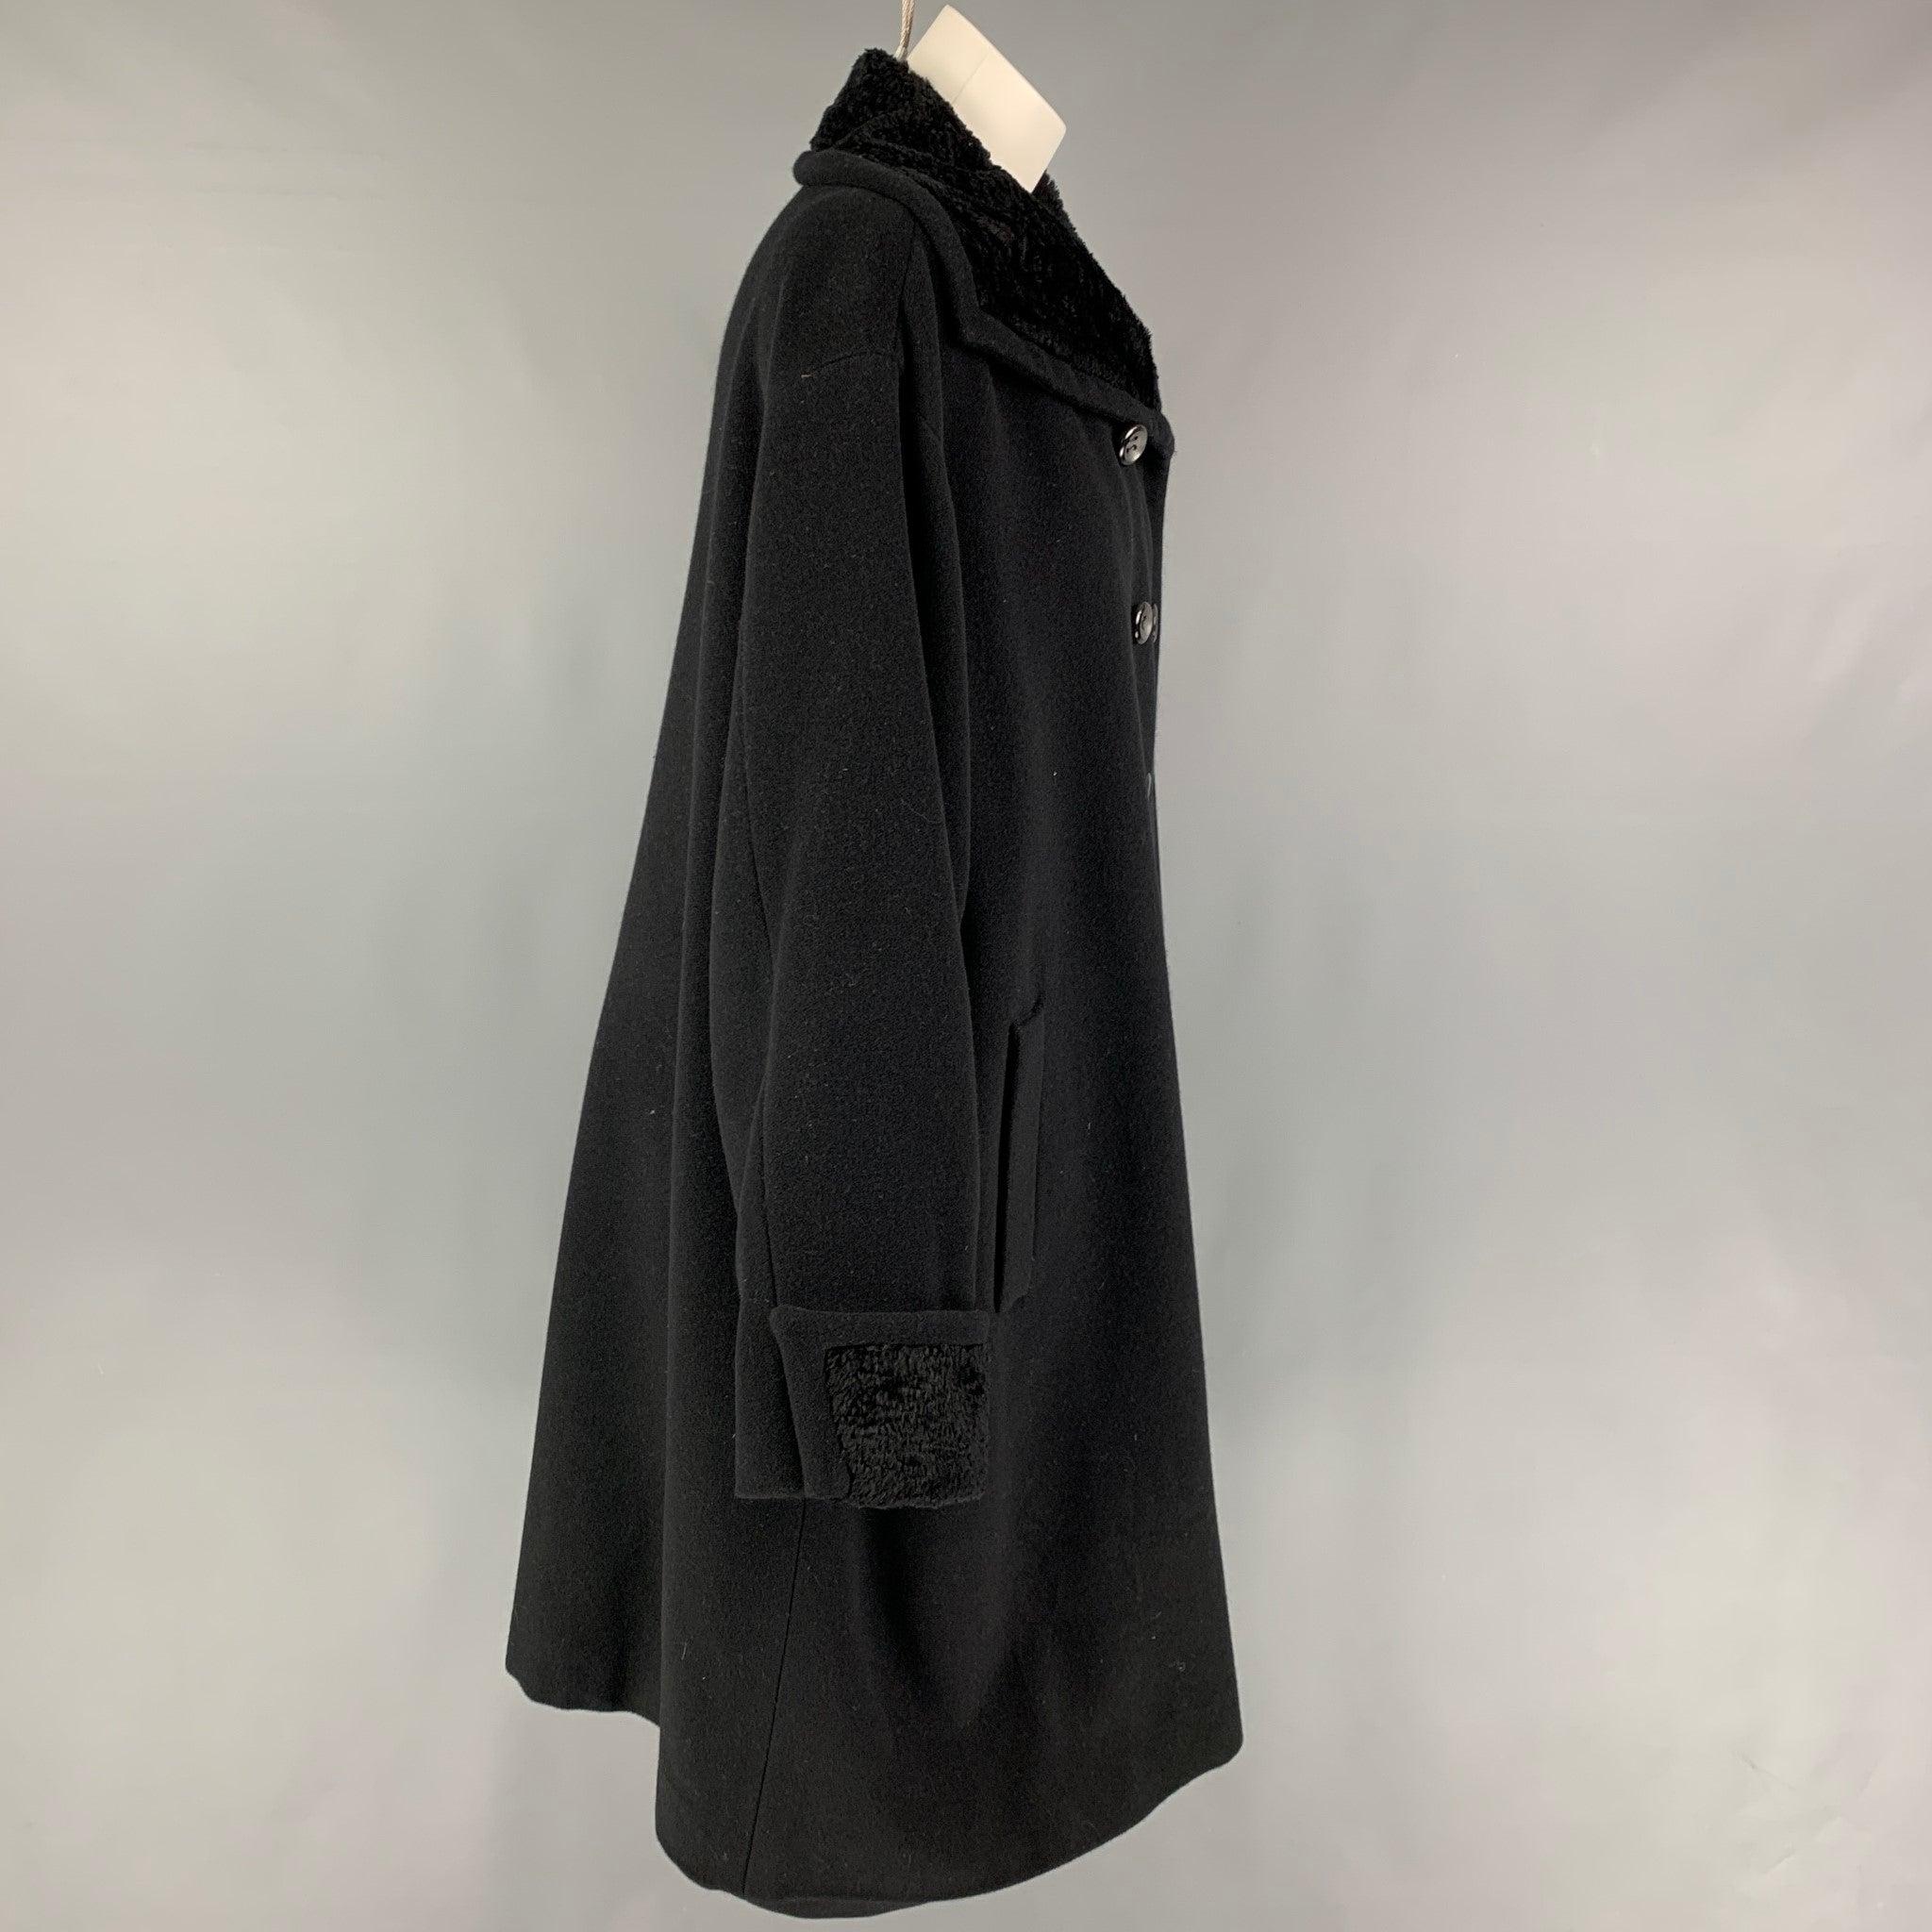 BYBLOS coat comes in a black wool featuring a oversized fit, textured trim, and a double breasted closure. Made in Italy.
Very Good
Pre-Owned Condition. 

Marked:   40 

Measurements: 
 
Shoulder: 19.5 inches  Bust: 48 inches  Sleeve: 23.5 inches